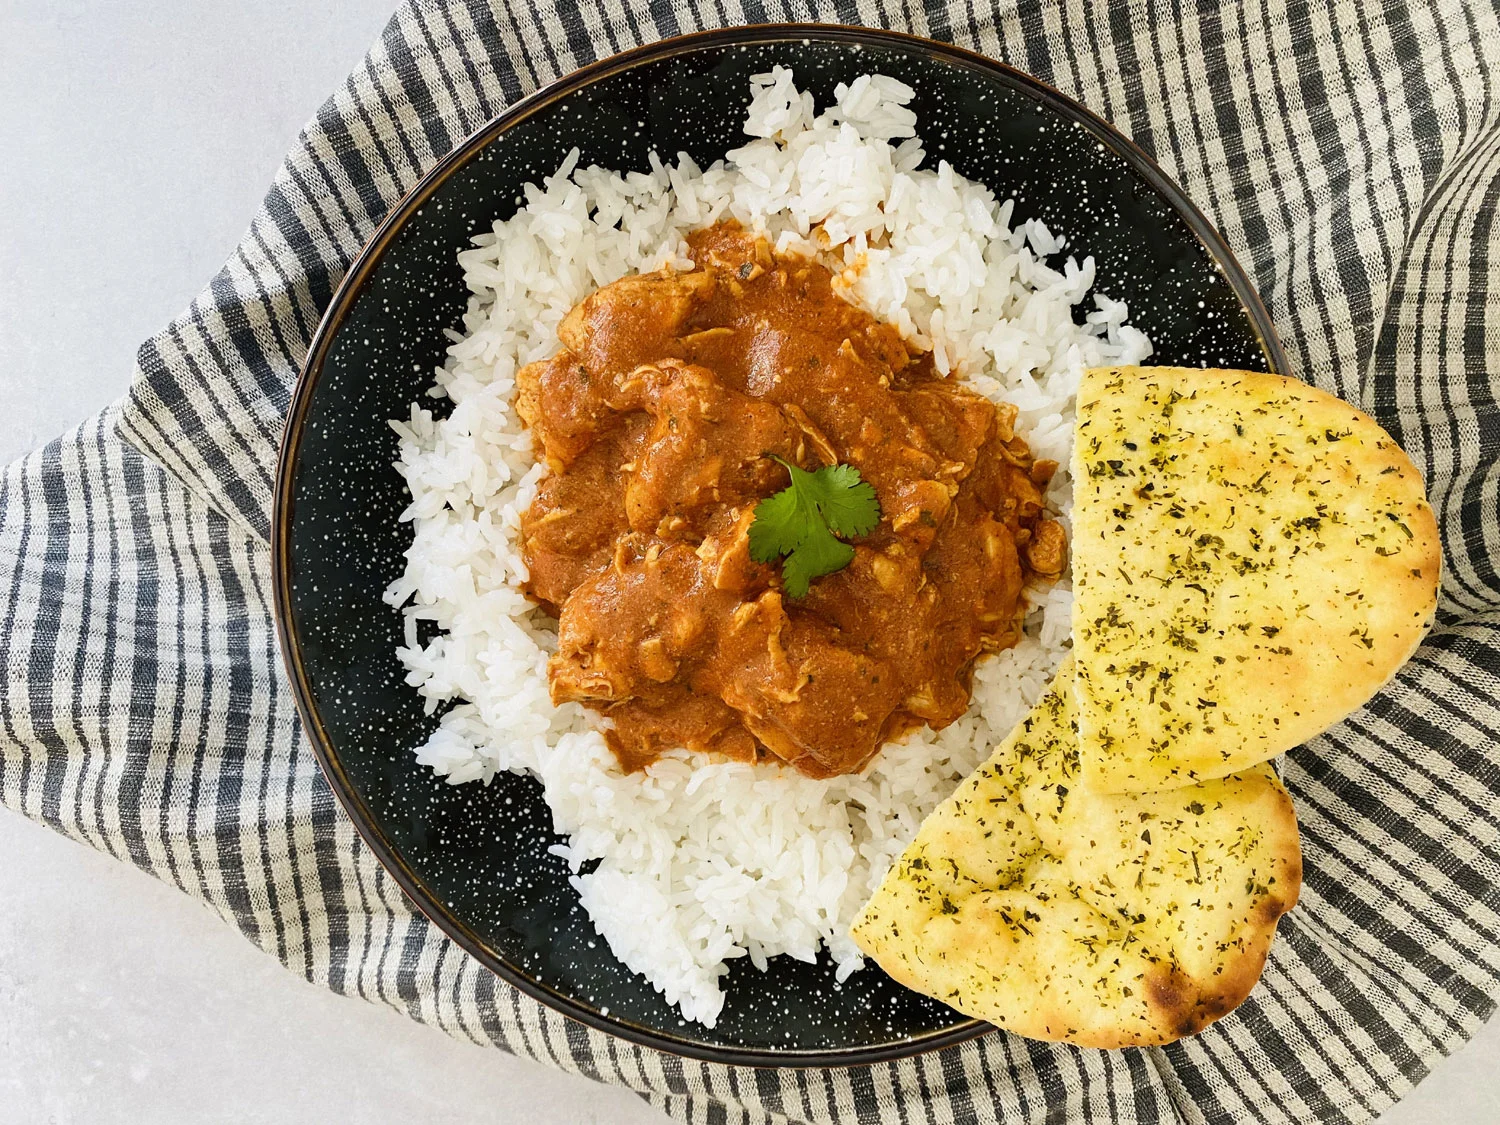 Chicken curry on a plate with white rice and naan bread